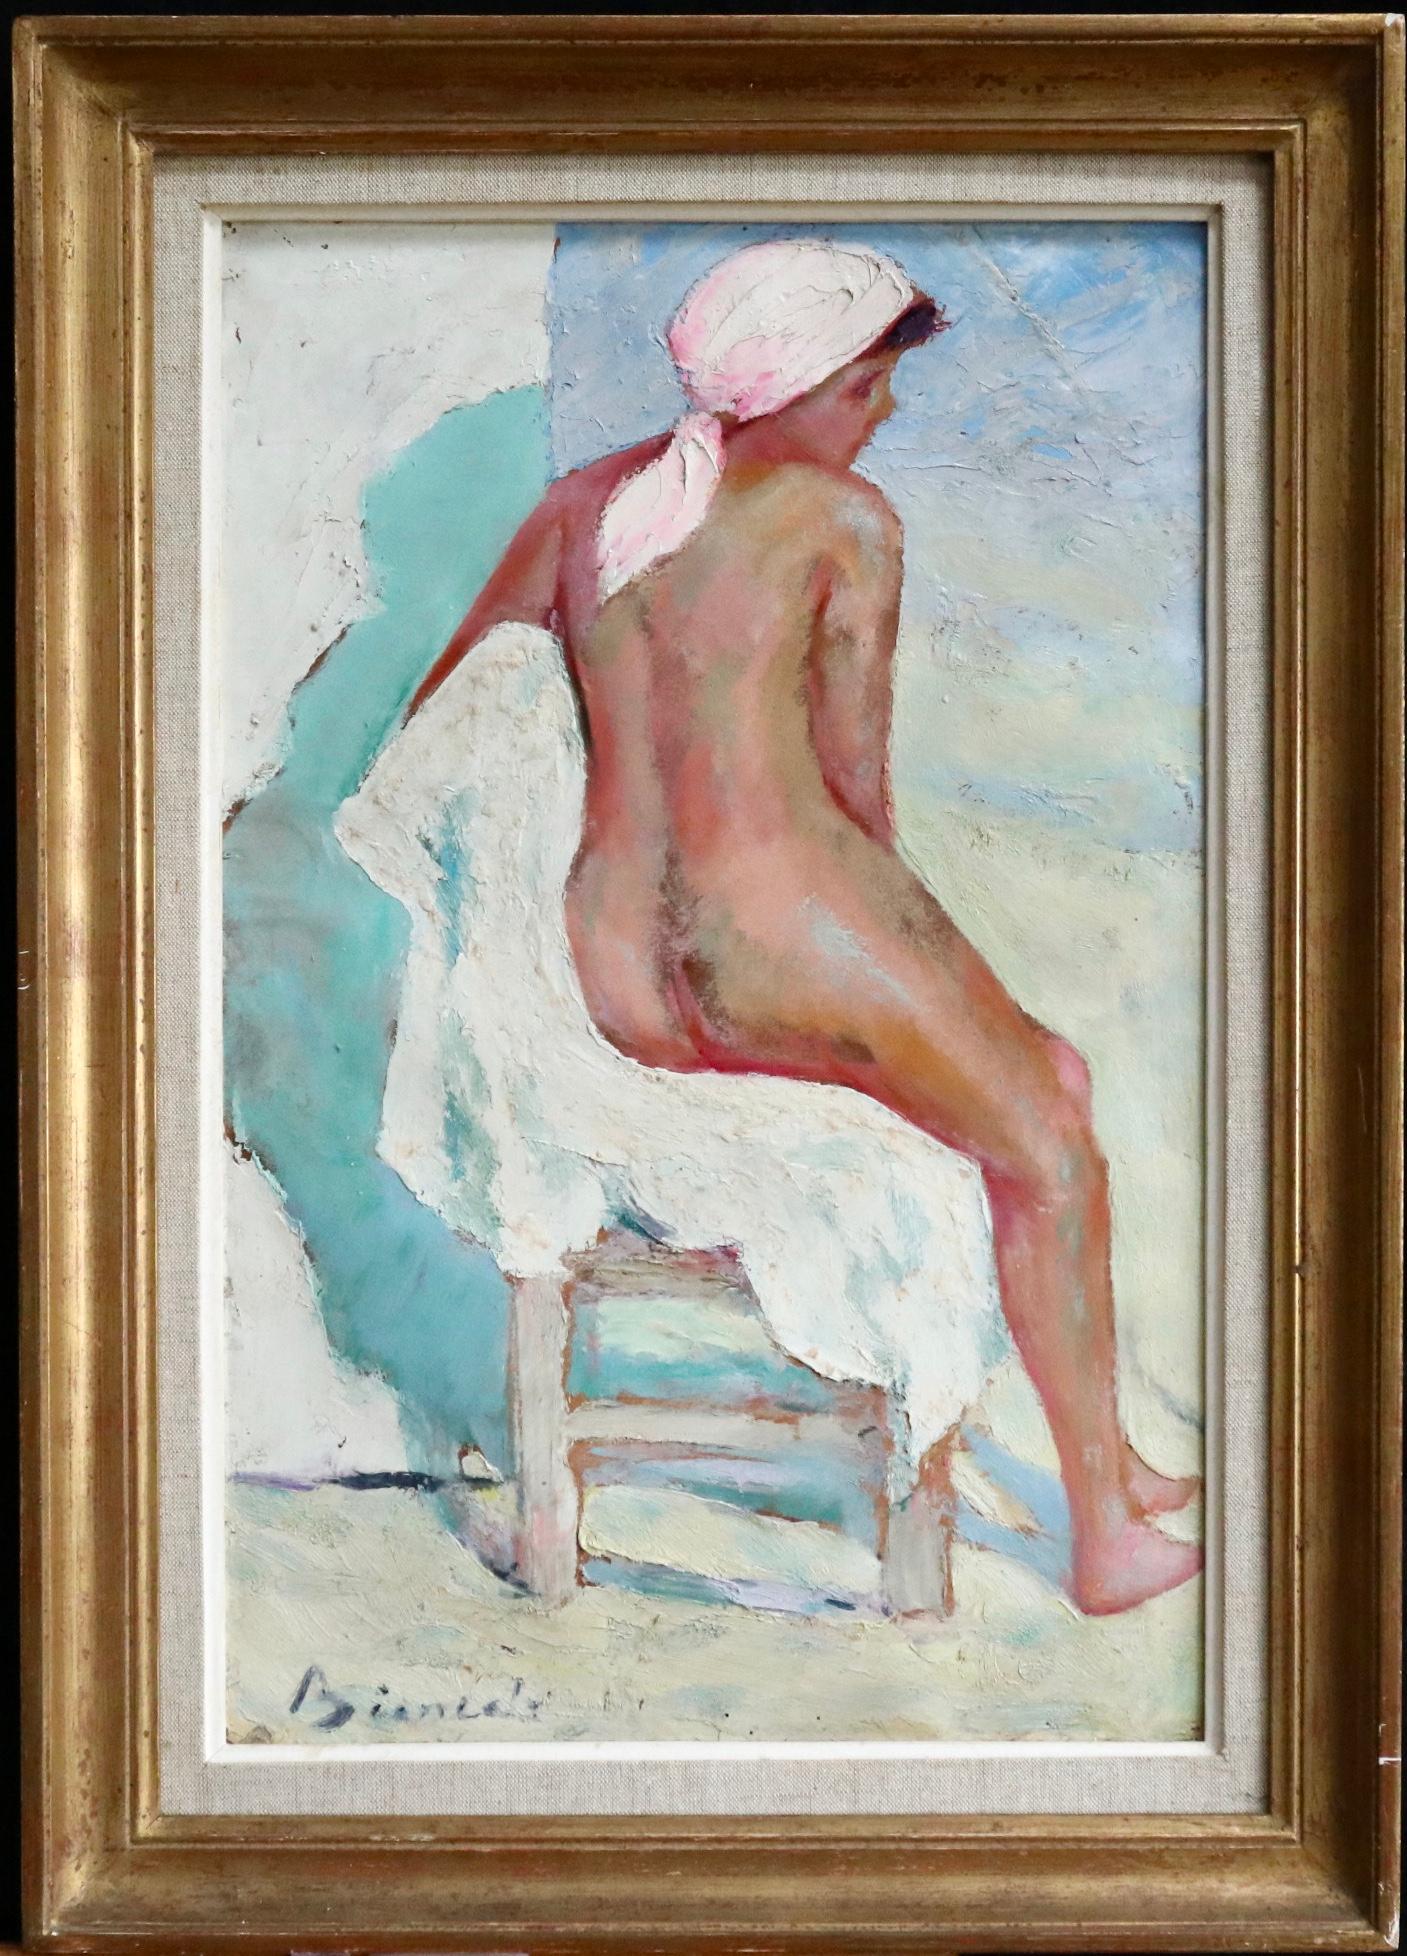 The Beach Tent - Post Impressionist Oil, Seated Nude Woman by Bernardo Biancale 1